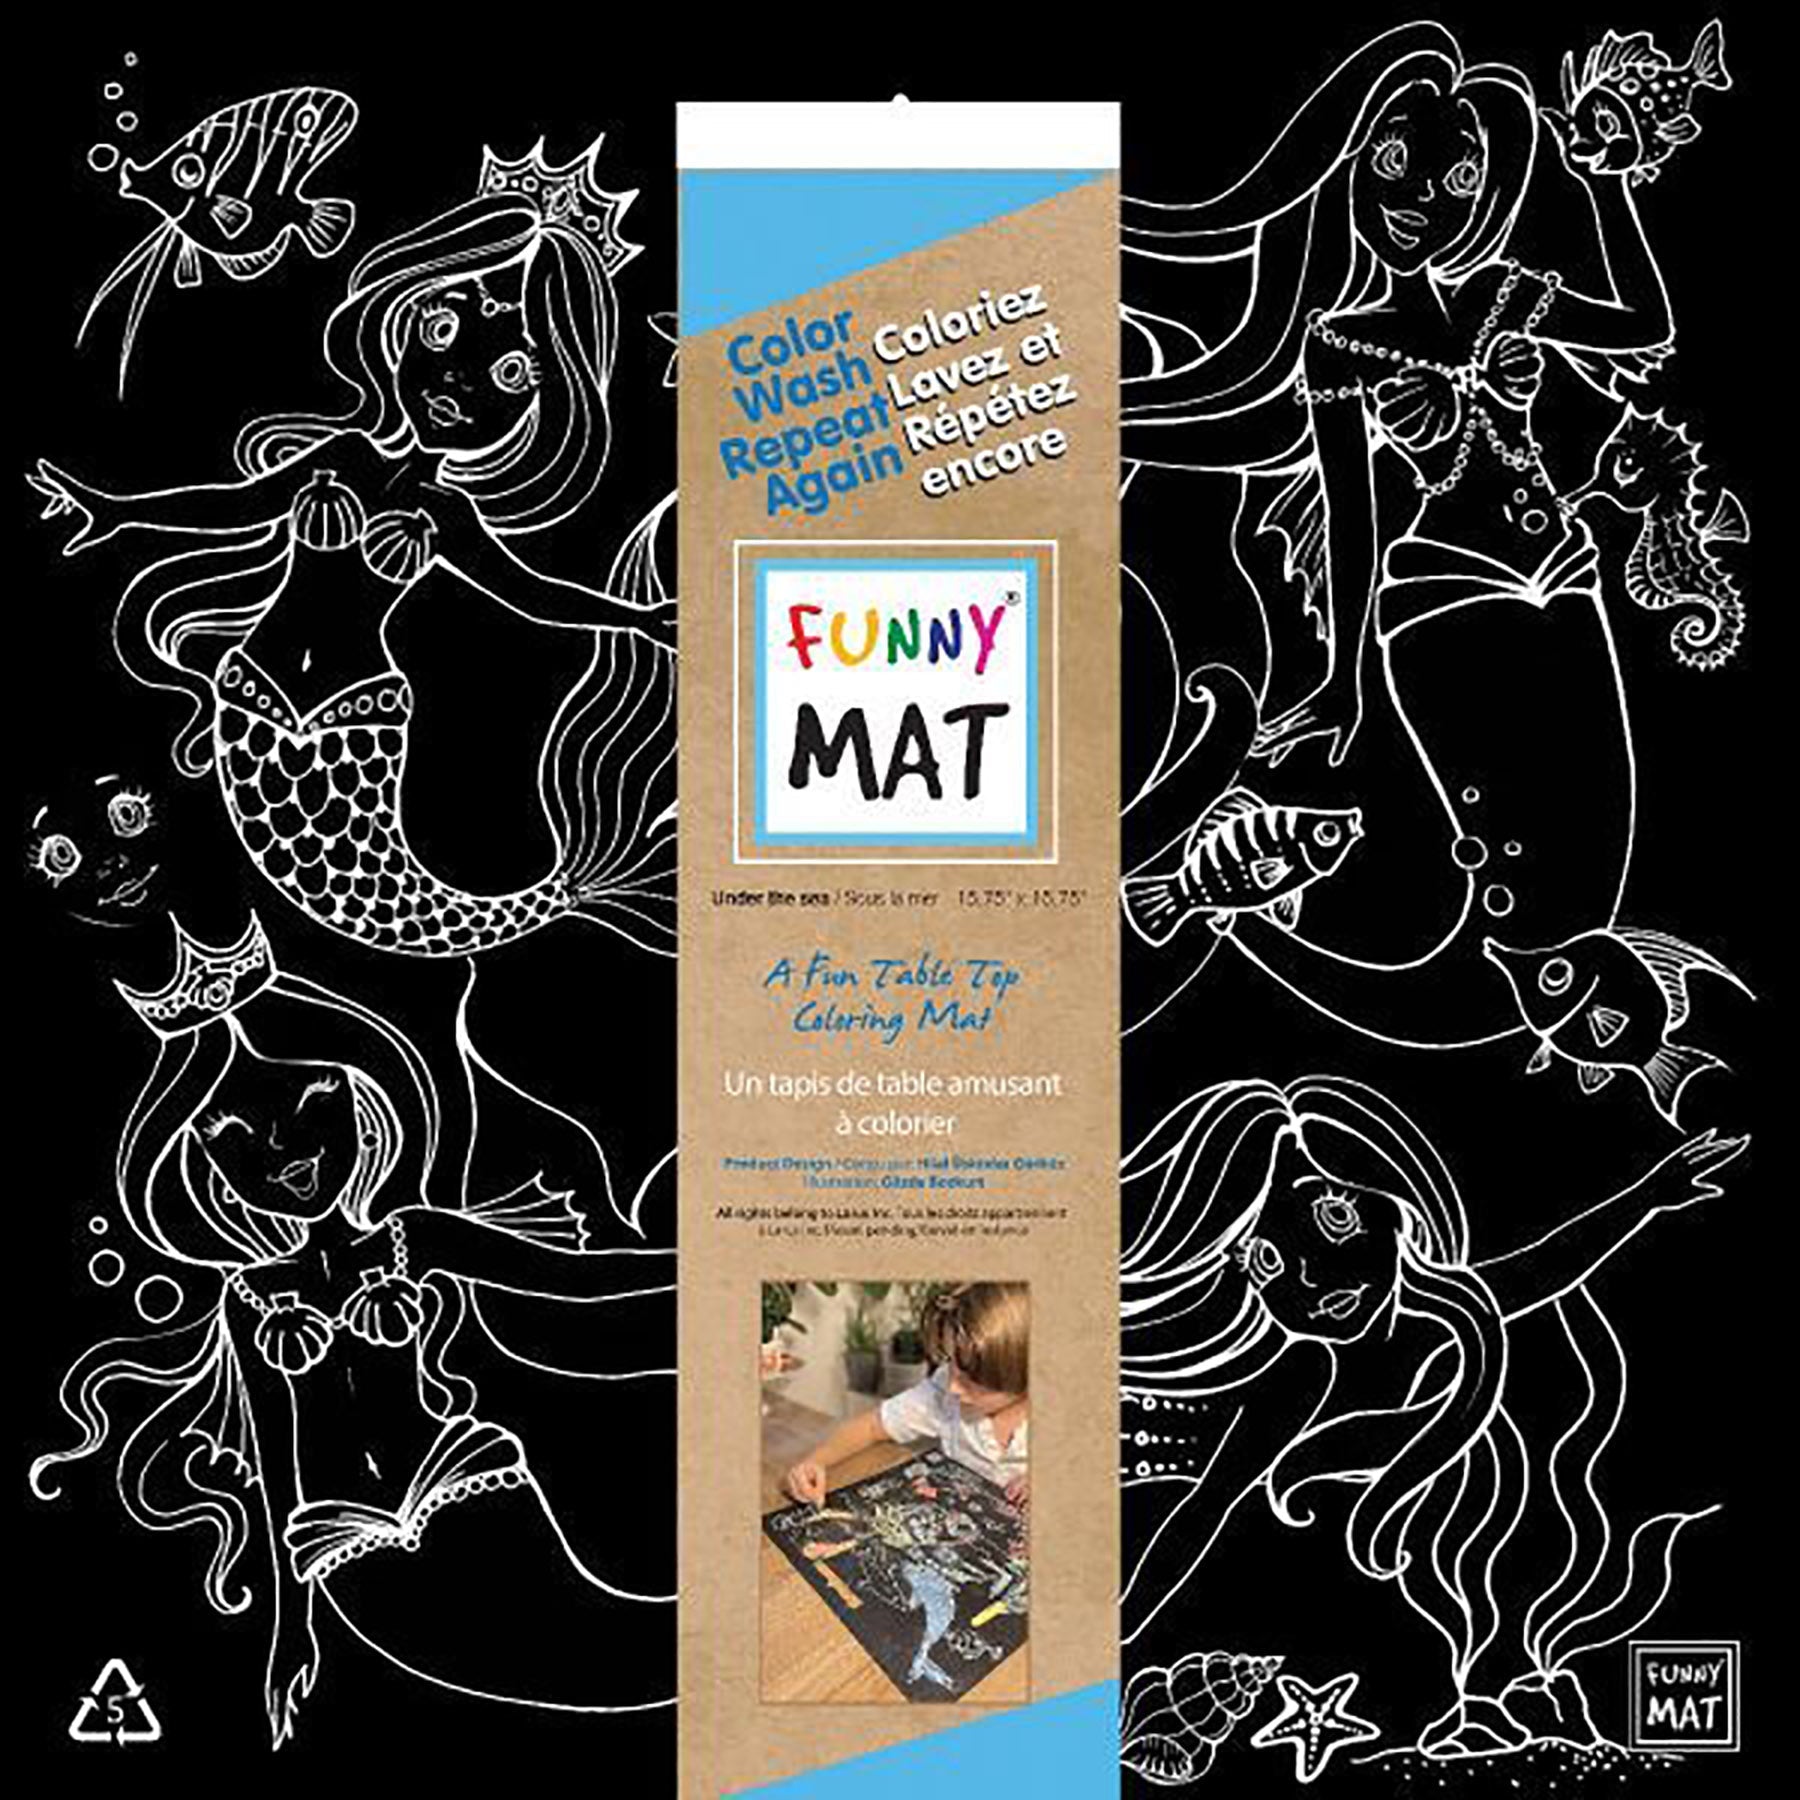 Funny Mat Coloring Placemat - Under the Sea - Black Background 15.75x15.75in